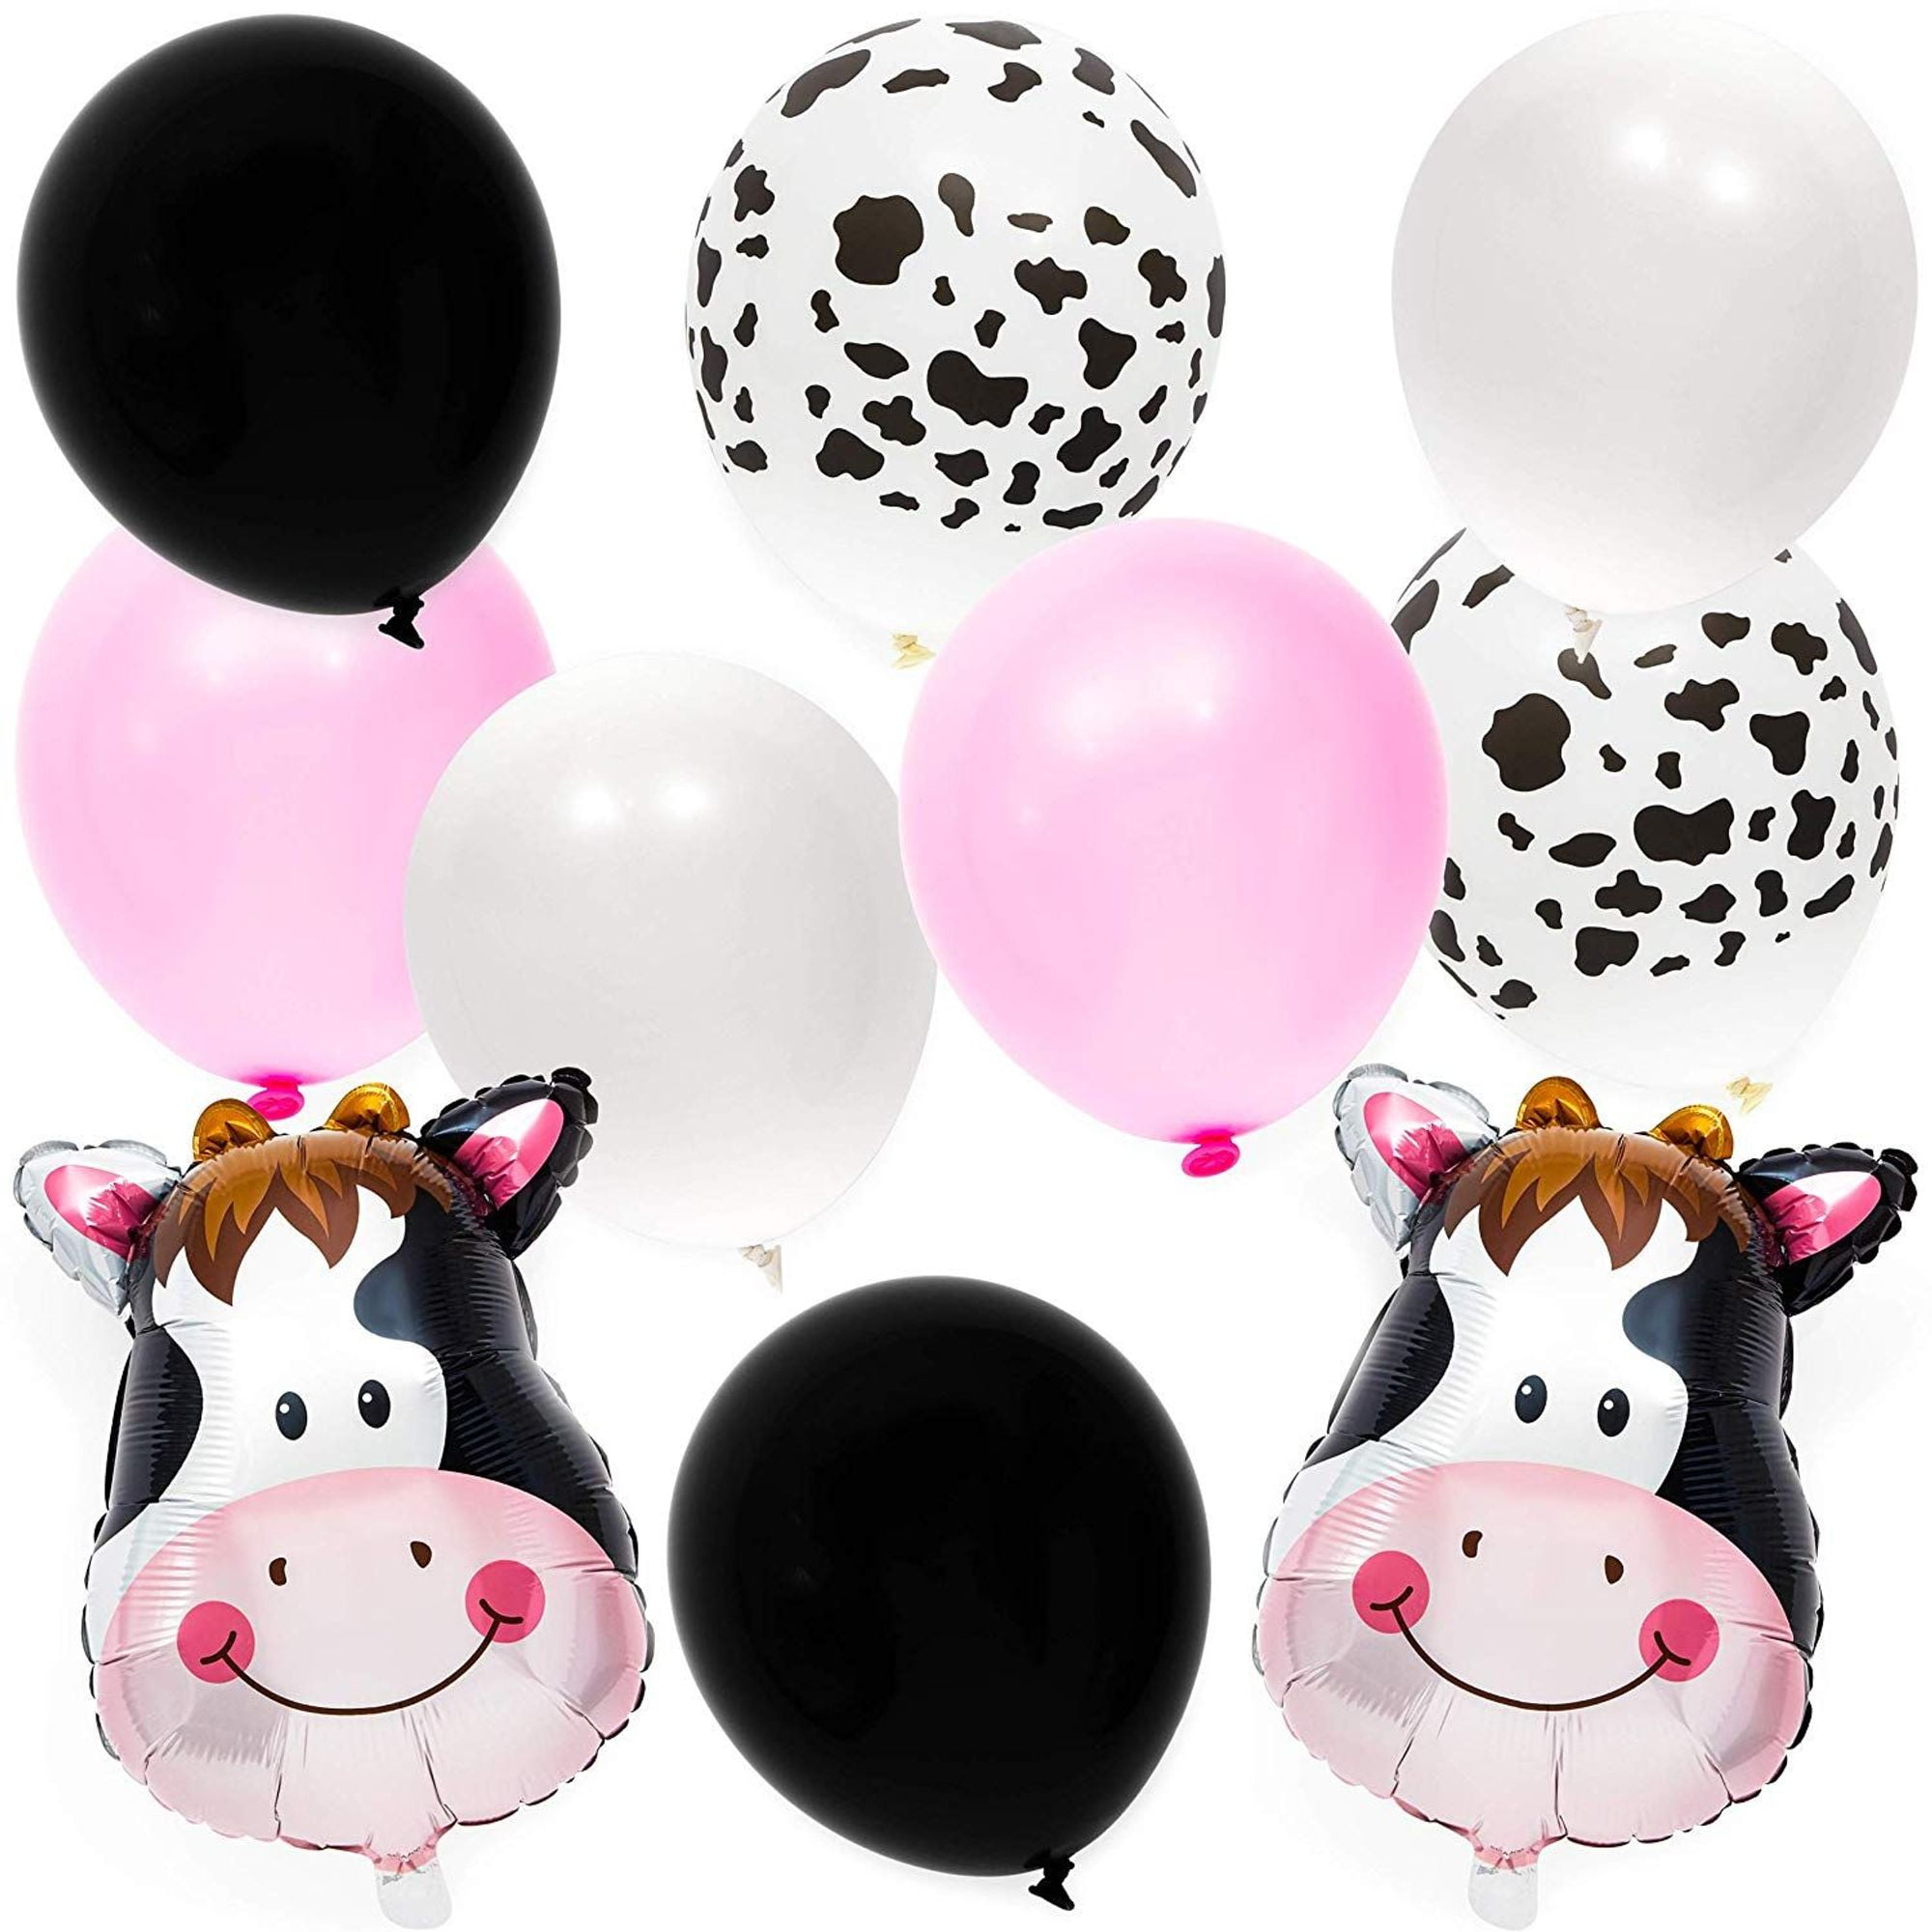 62 Packs Farm Animal Cow Print Balloons 18" for Kids Birthday Party